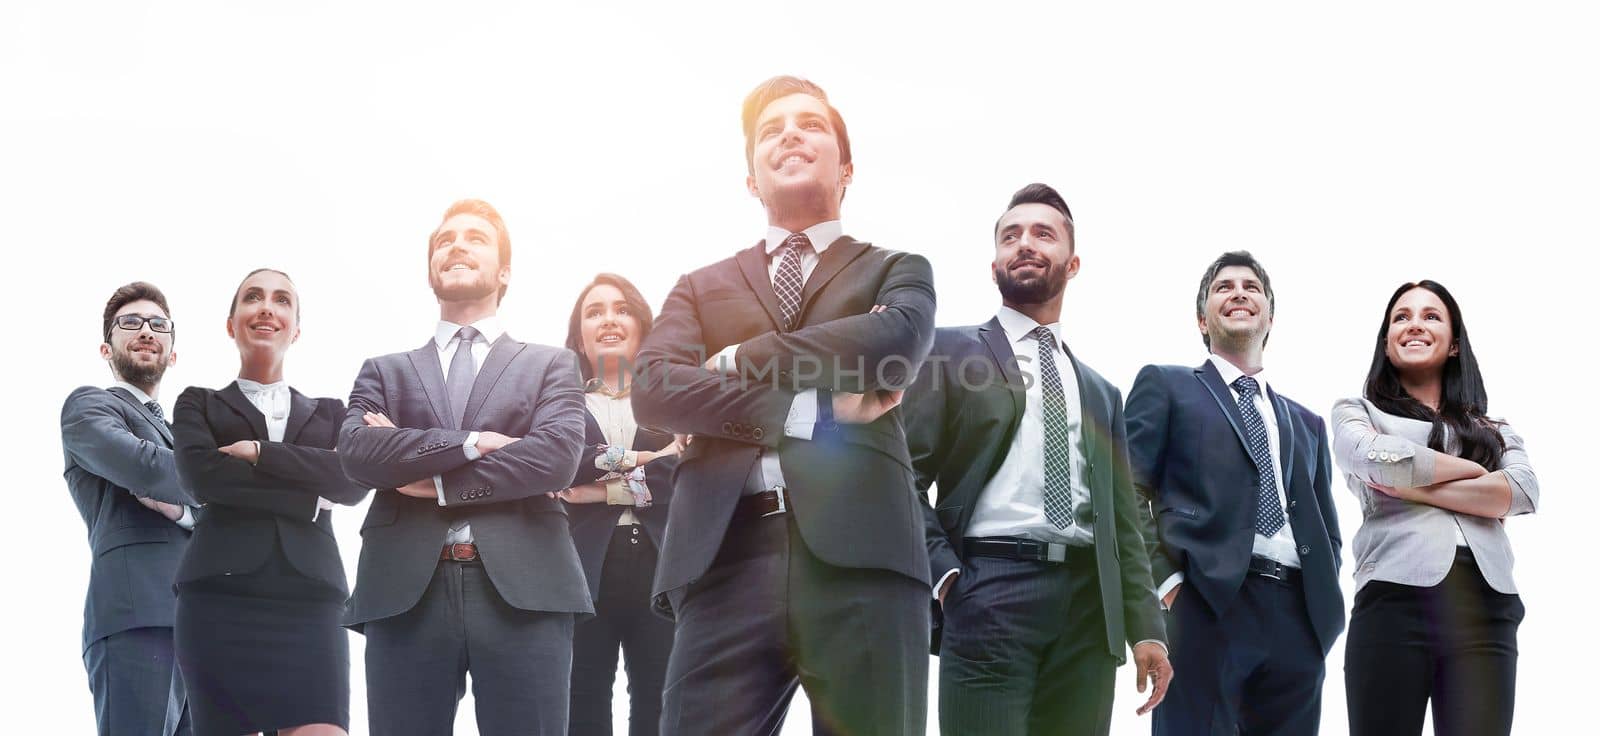 happy successful business team isolated on white background by asdf